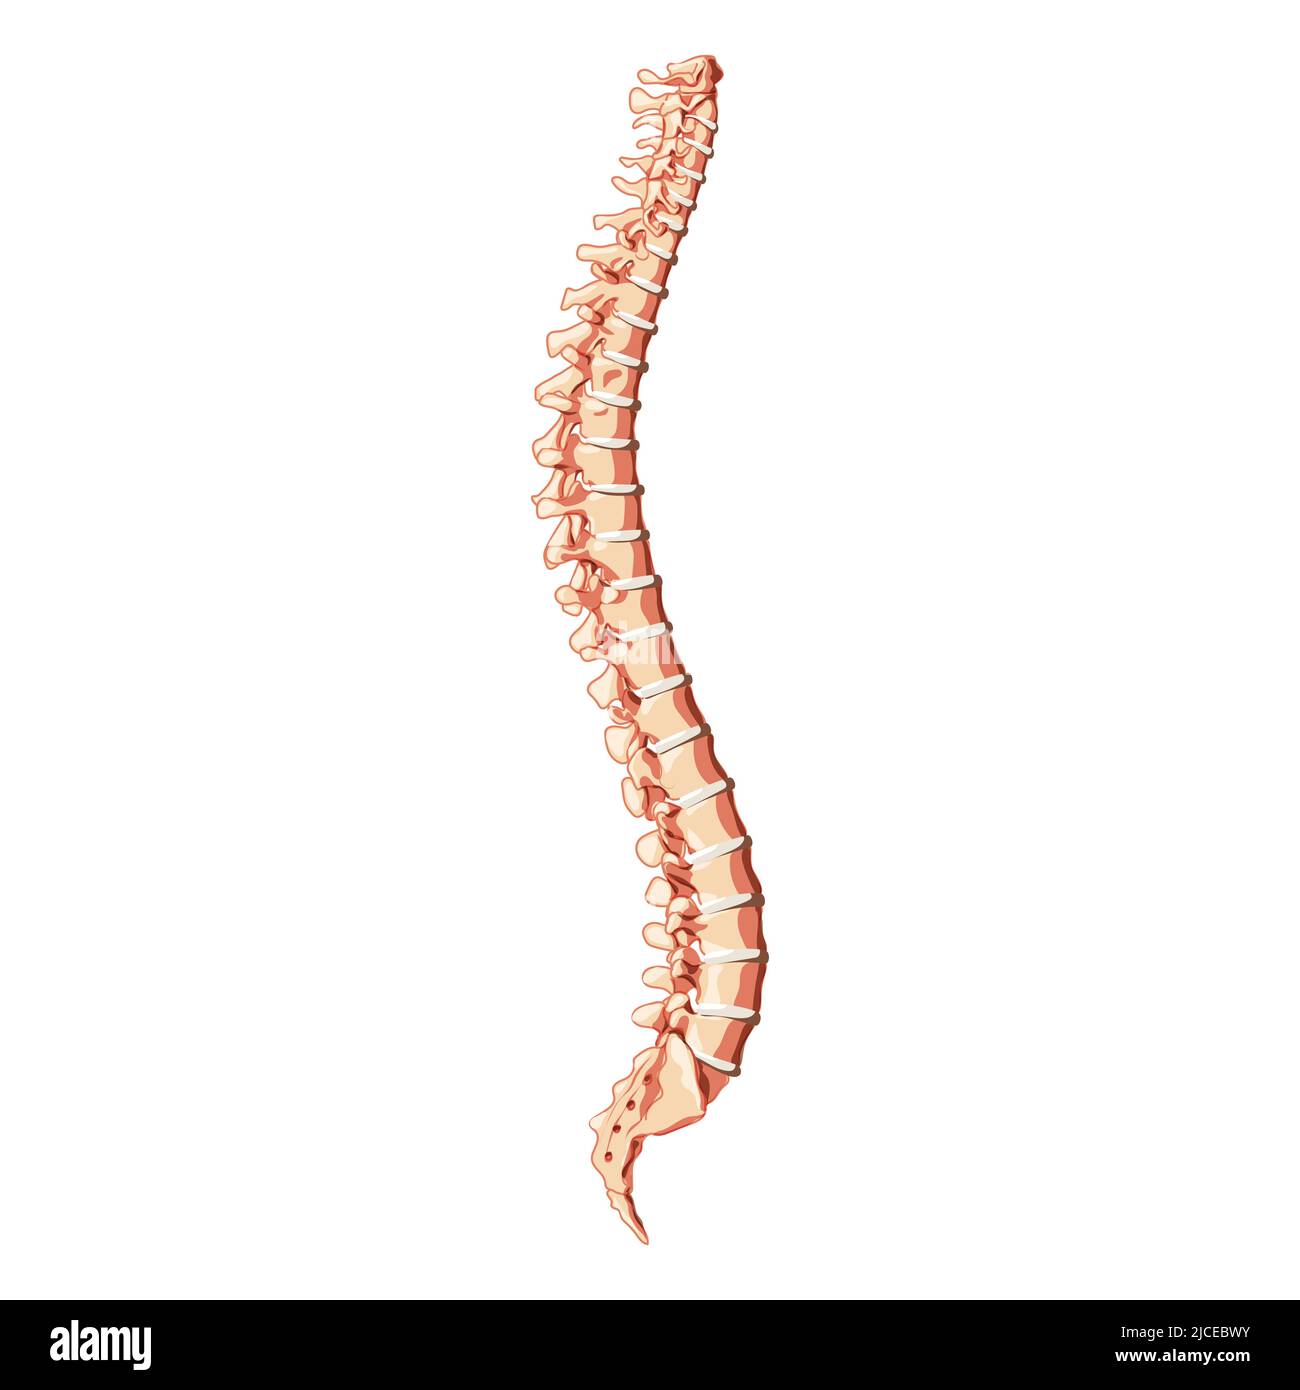 The human vertebral column spine anatomy side lateral with Intervertebral disc. Vector flat 3D realistic concept illustration in natural colors, spine isolated on white background. Stock Vector